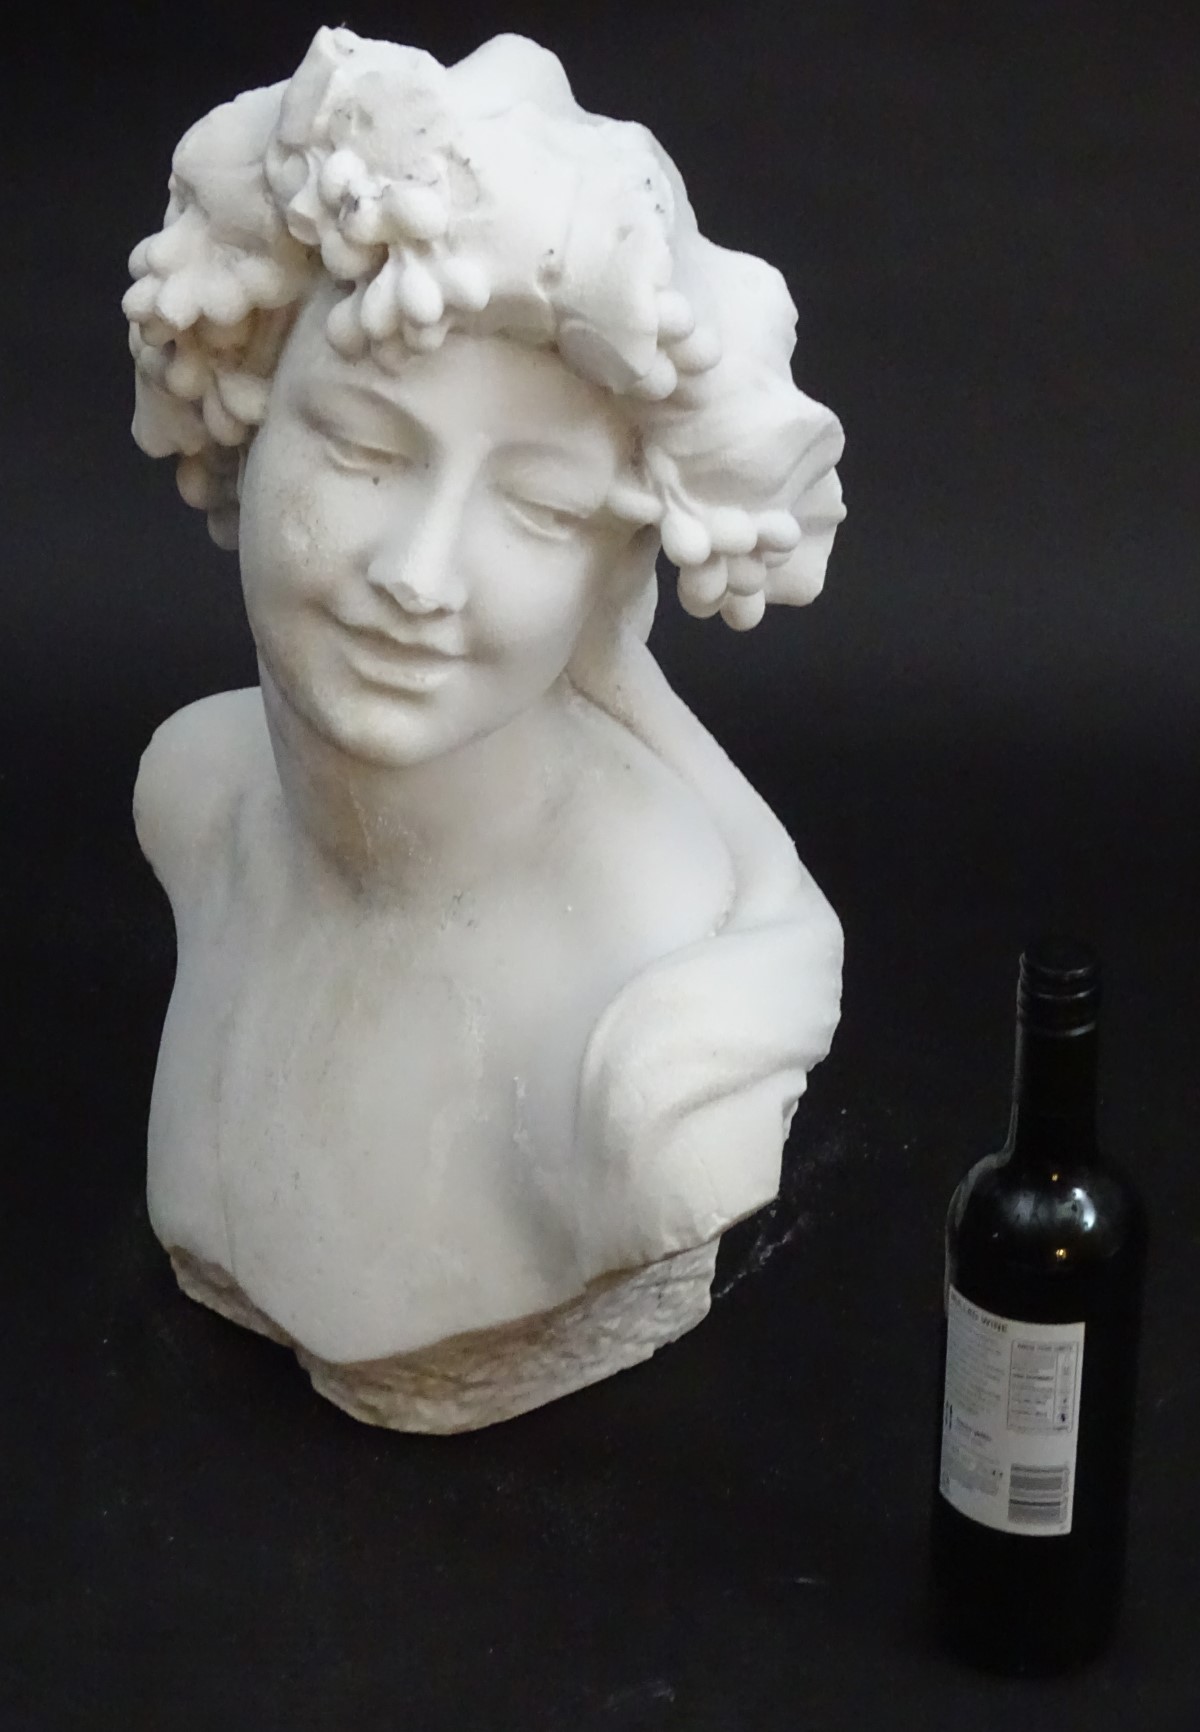 A reconstituted marble sculpture: bust of Bacchus, Roman God of Wine, Agriculture and fertility. - Image 3 of 18